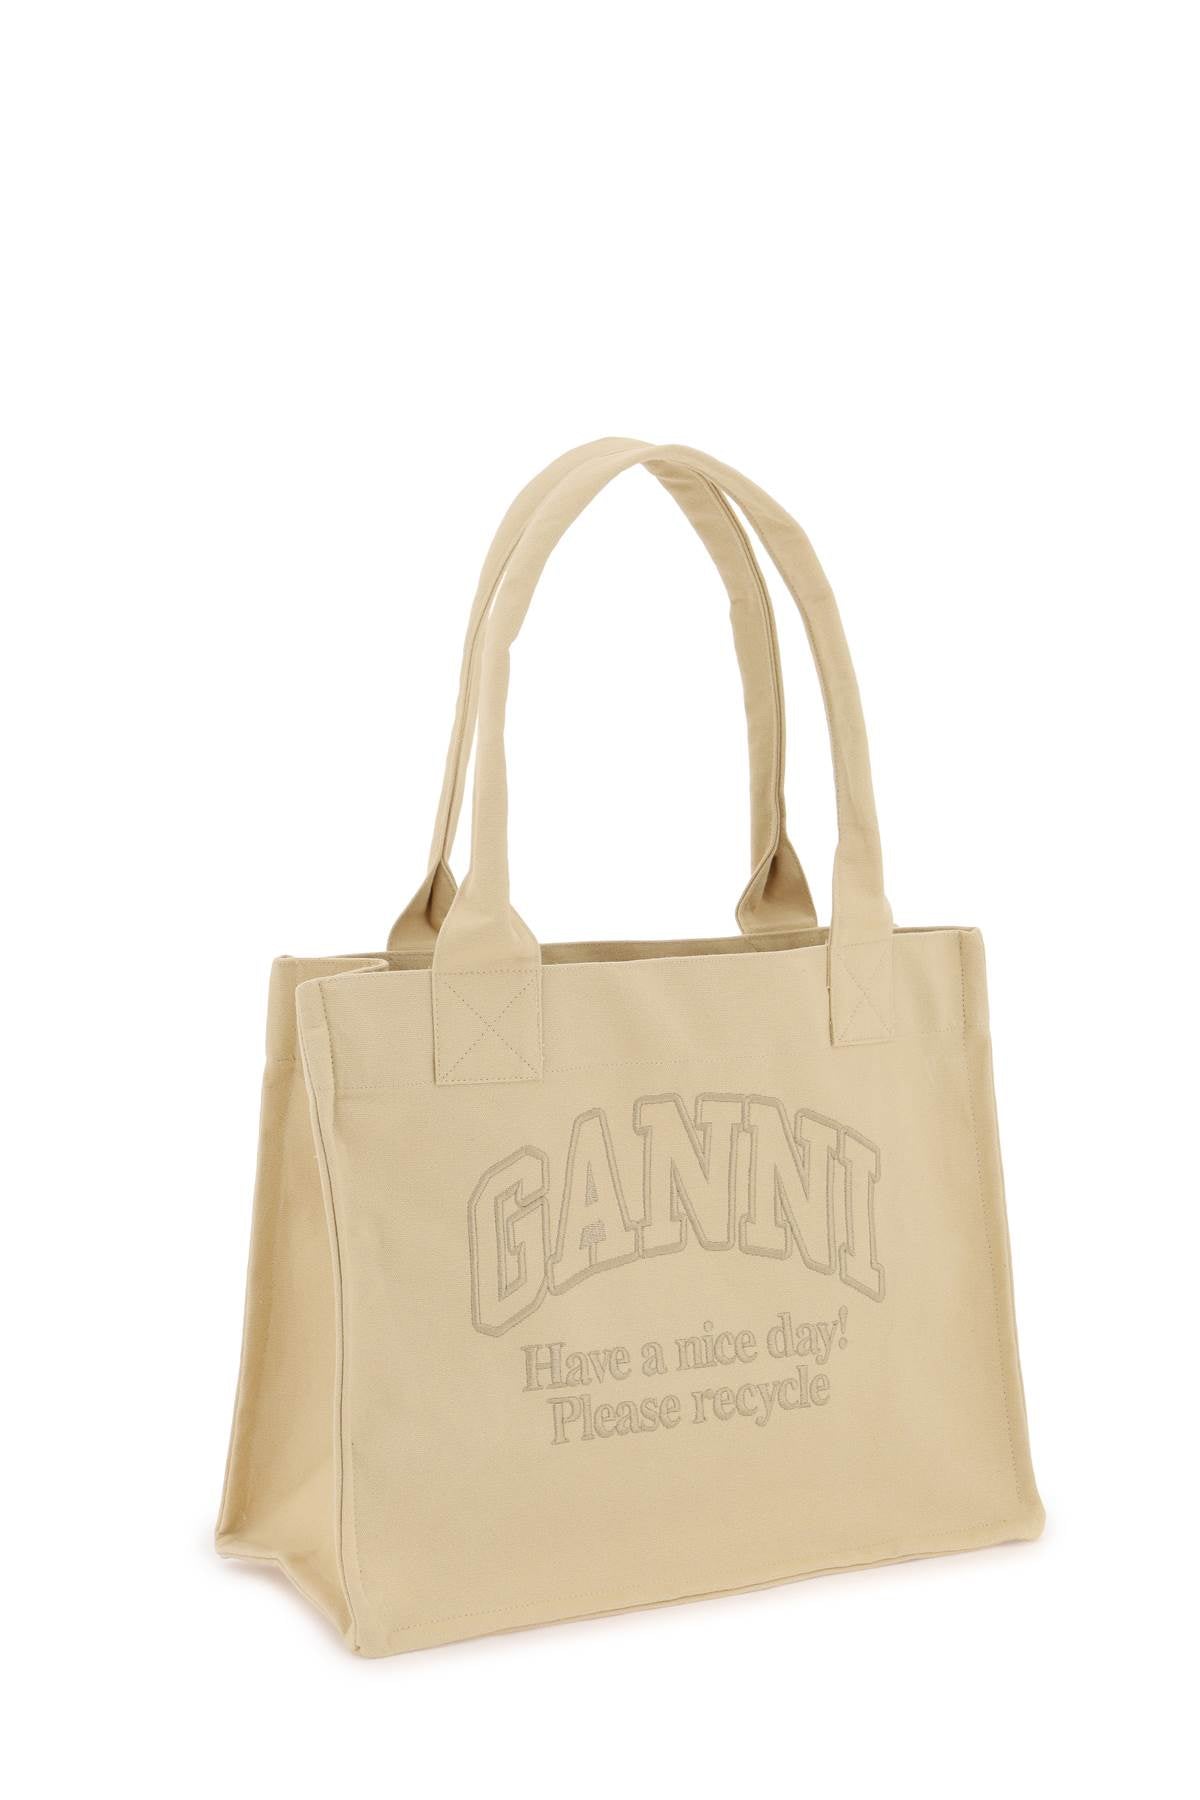 Ganni tote bag with embroidery-2